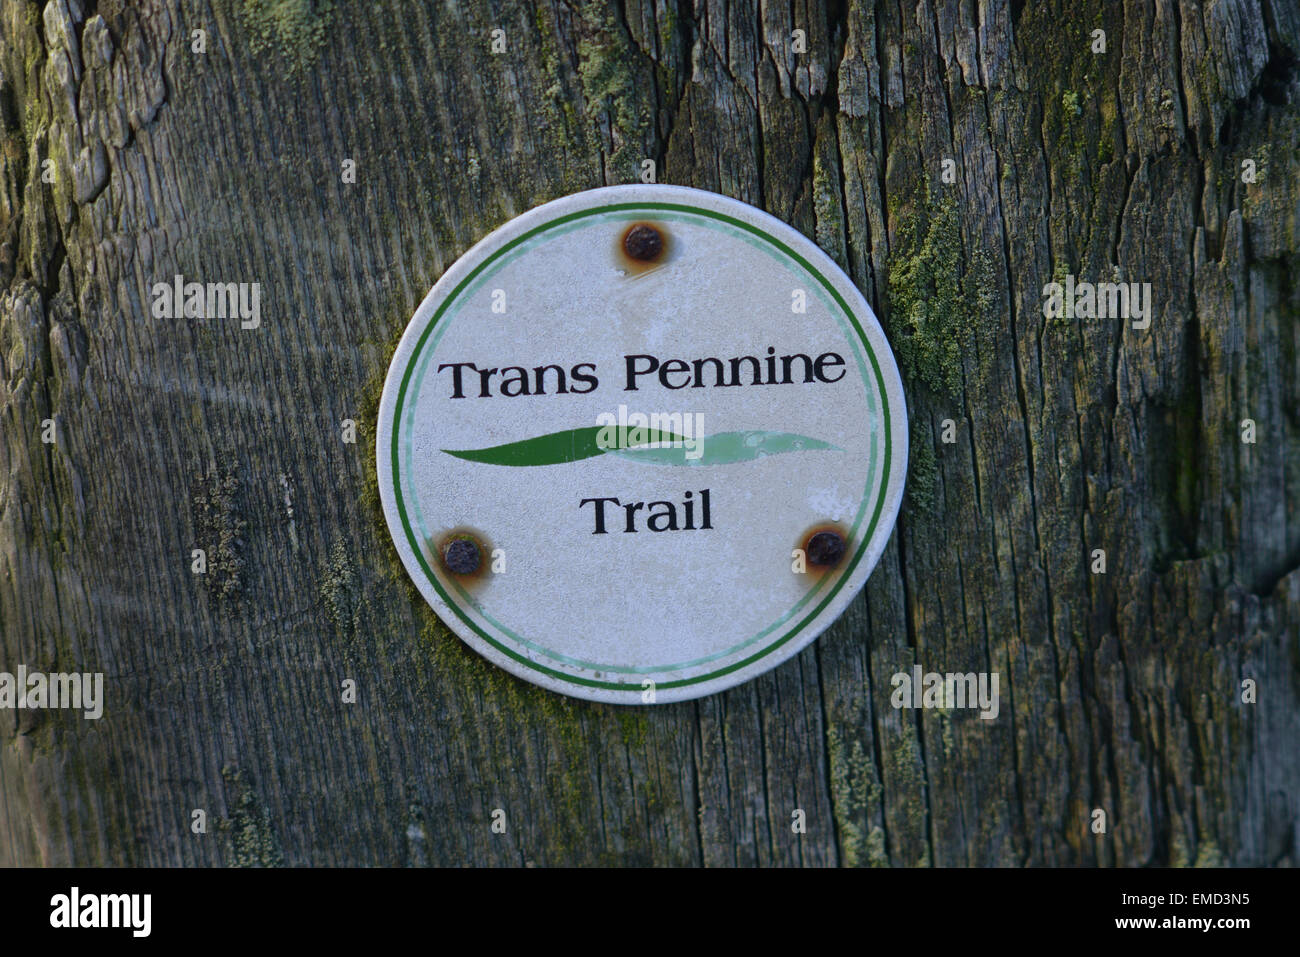 Trans Pennine Trail sign. Picture: Scott Bairstow/Alamy Stock Photo